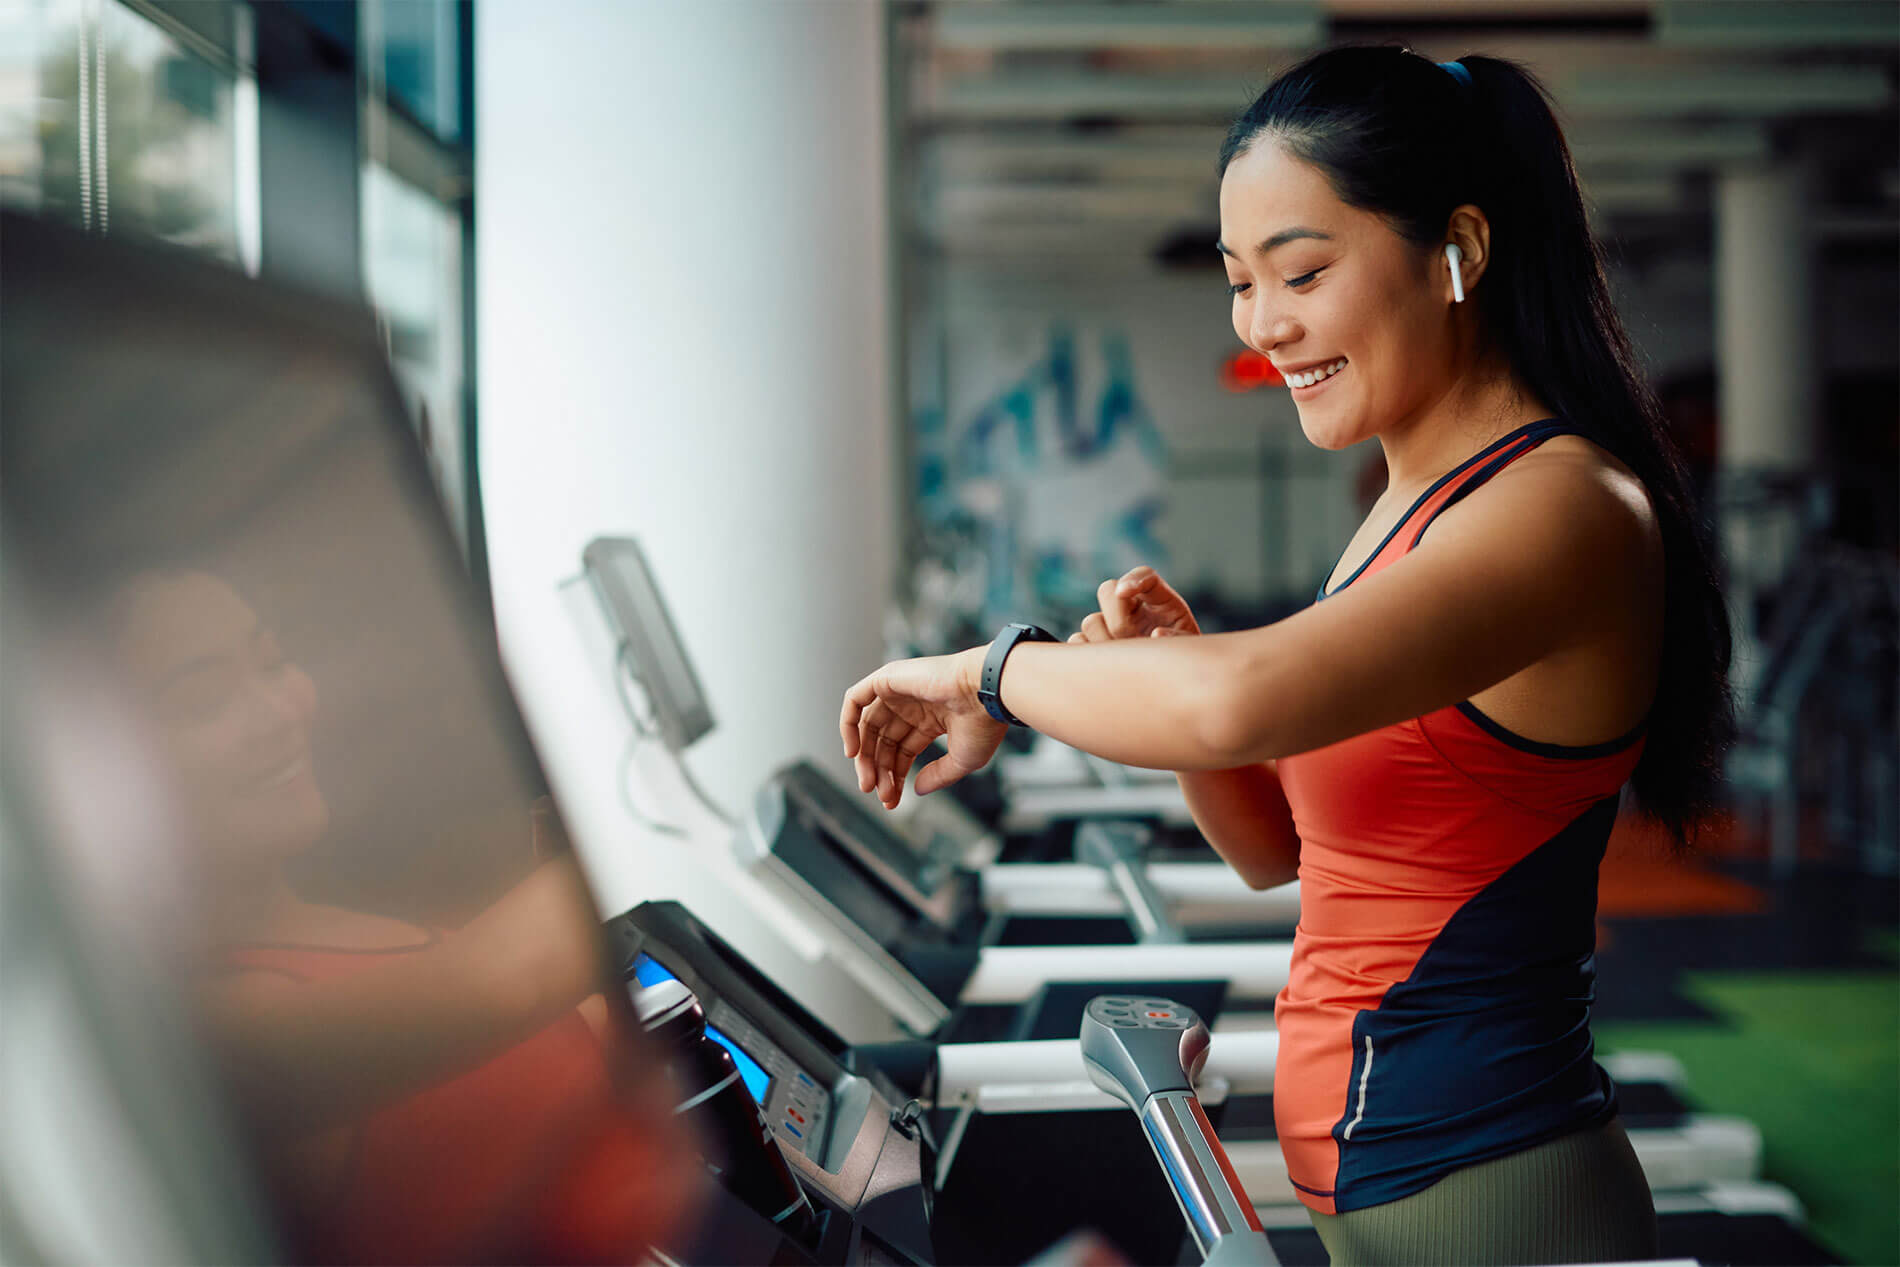 Young woman on treadmill